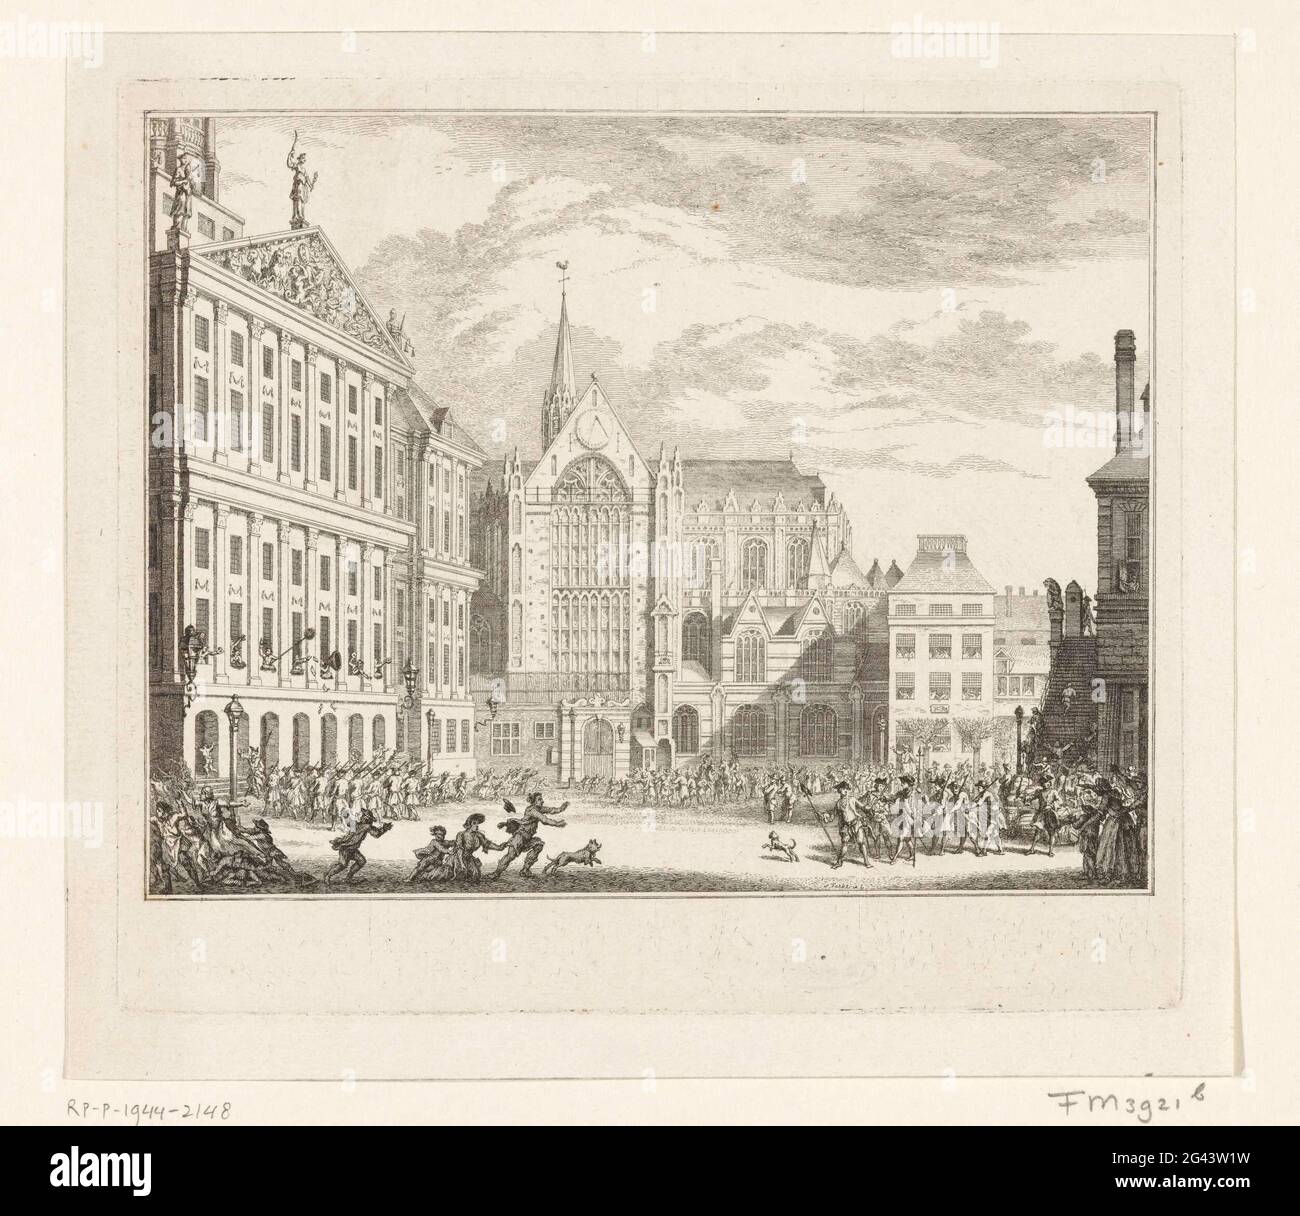 Captain Scheerenberg drives away the uproar turners, 1747. Under the leadership of Captain Abraham Scheerenberg, OrangeGezinde Raaders are dragged out of the town hall and from Dam Square, November 9, 1747. In the occupied city hall, a demonstrant led a craze from the window, which is a mocking reference to the Roede behave through the schout. In the middle the new church and on the right a part of the wager. Stock Photo